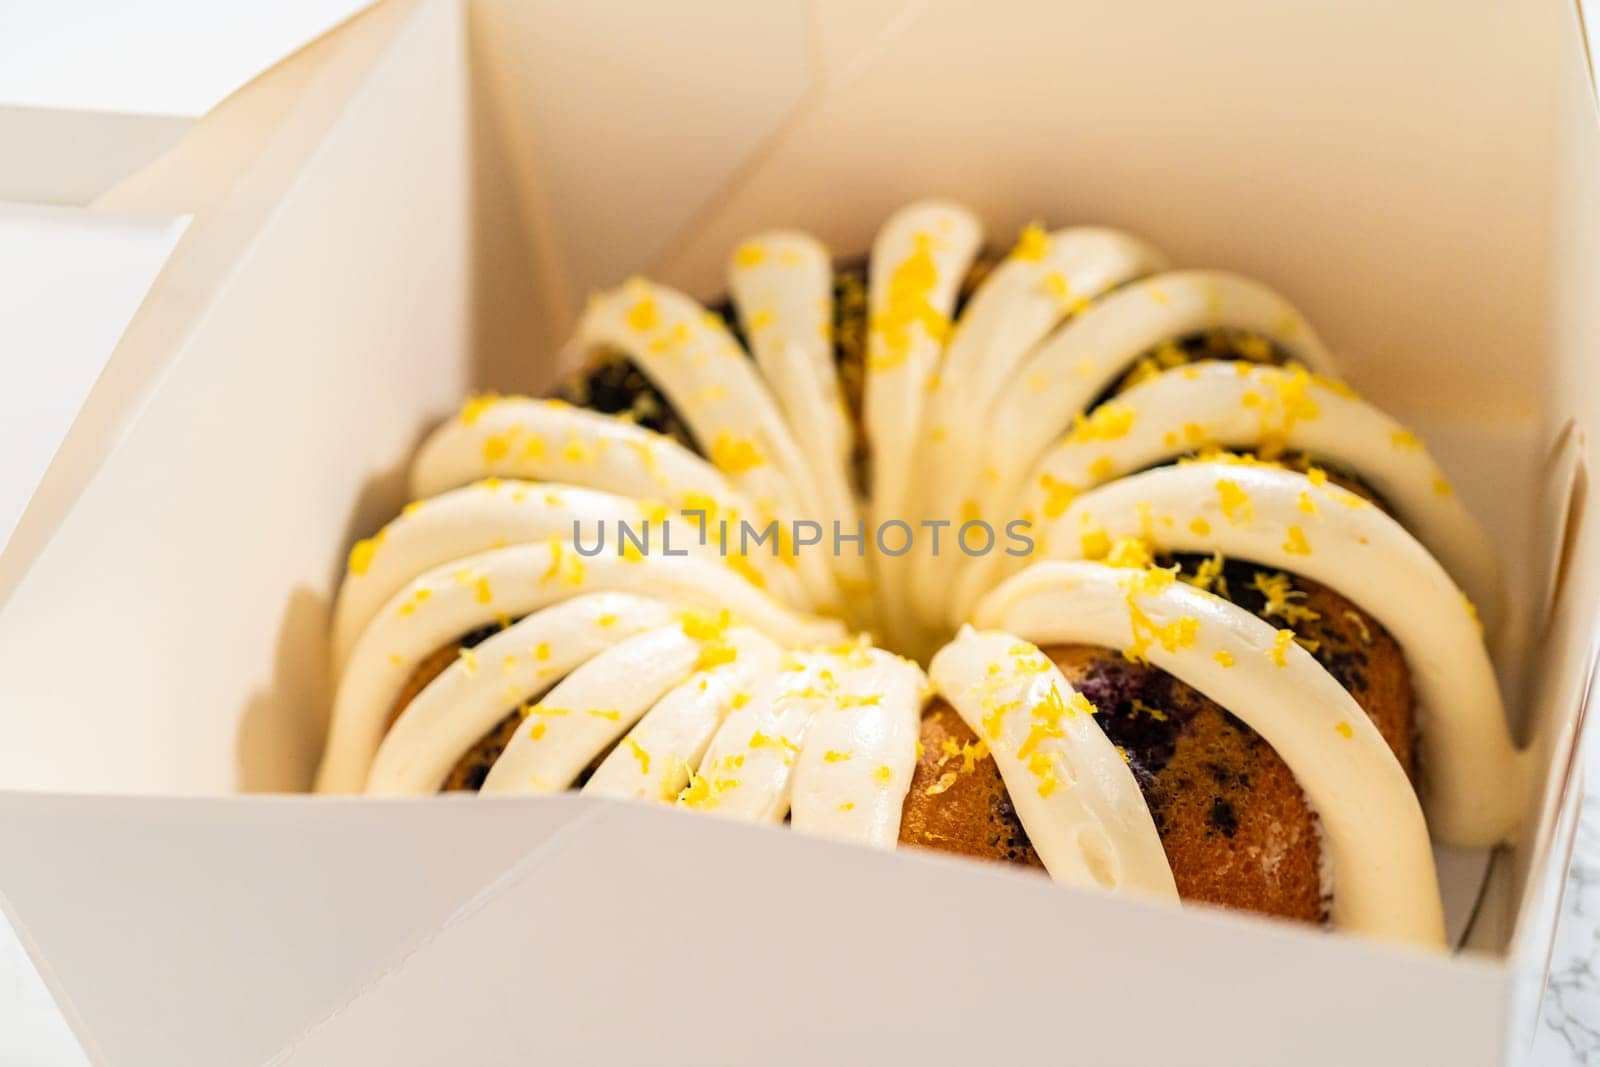 Crafting Lemon, Blueberry, and Vanilla Bundt Cakes by arinahabich